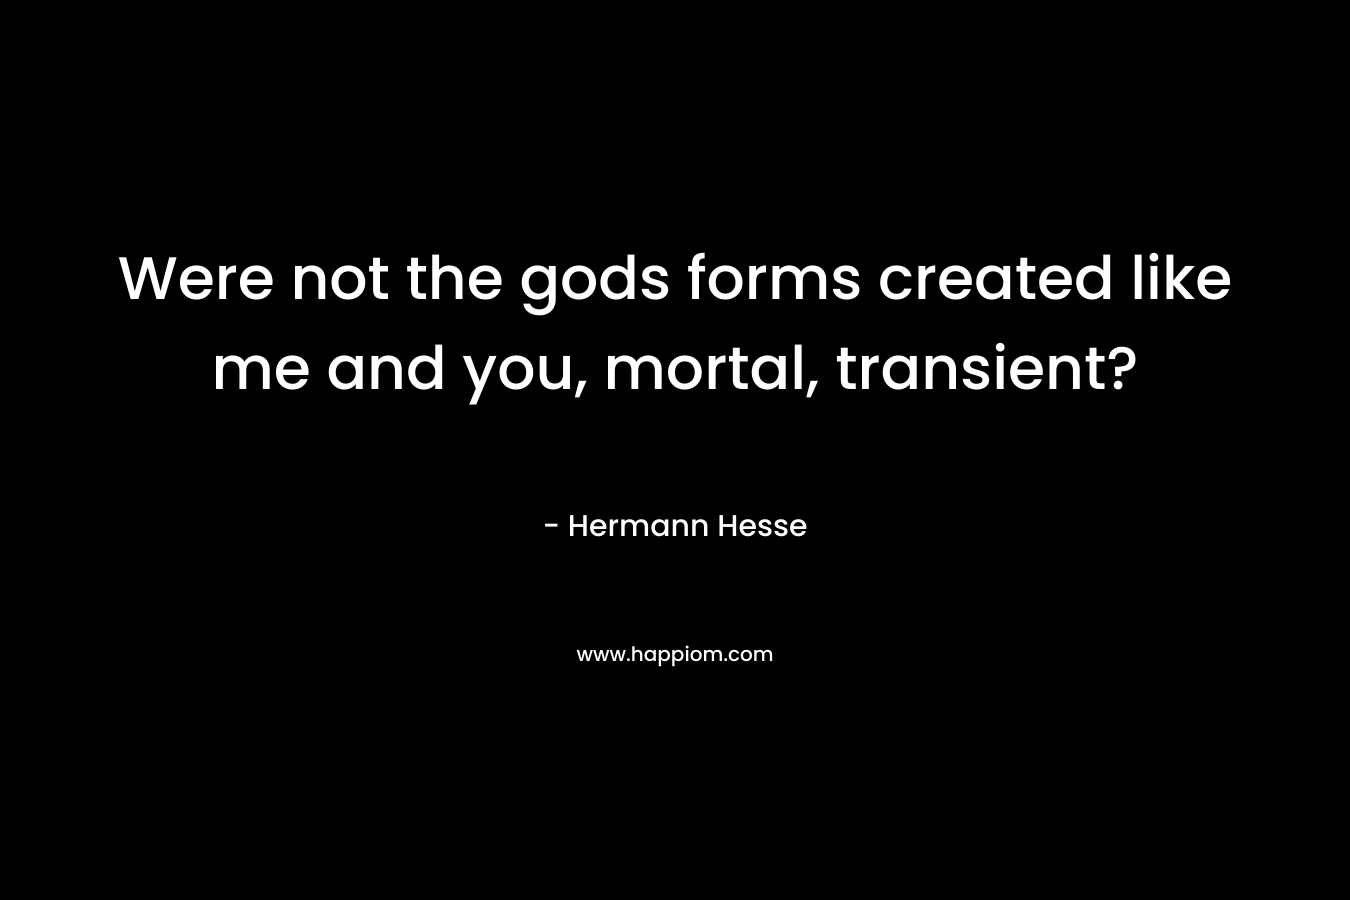 Were not the gods forms created like me and you, mortal, transient?